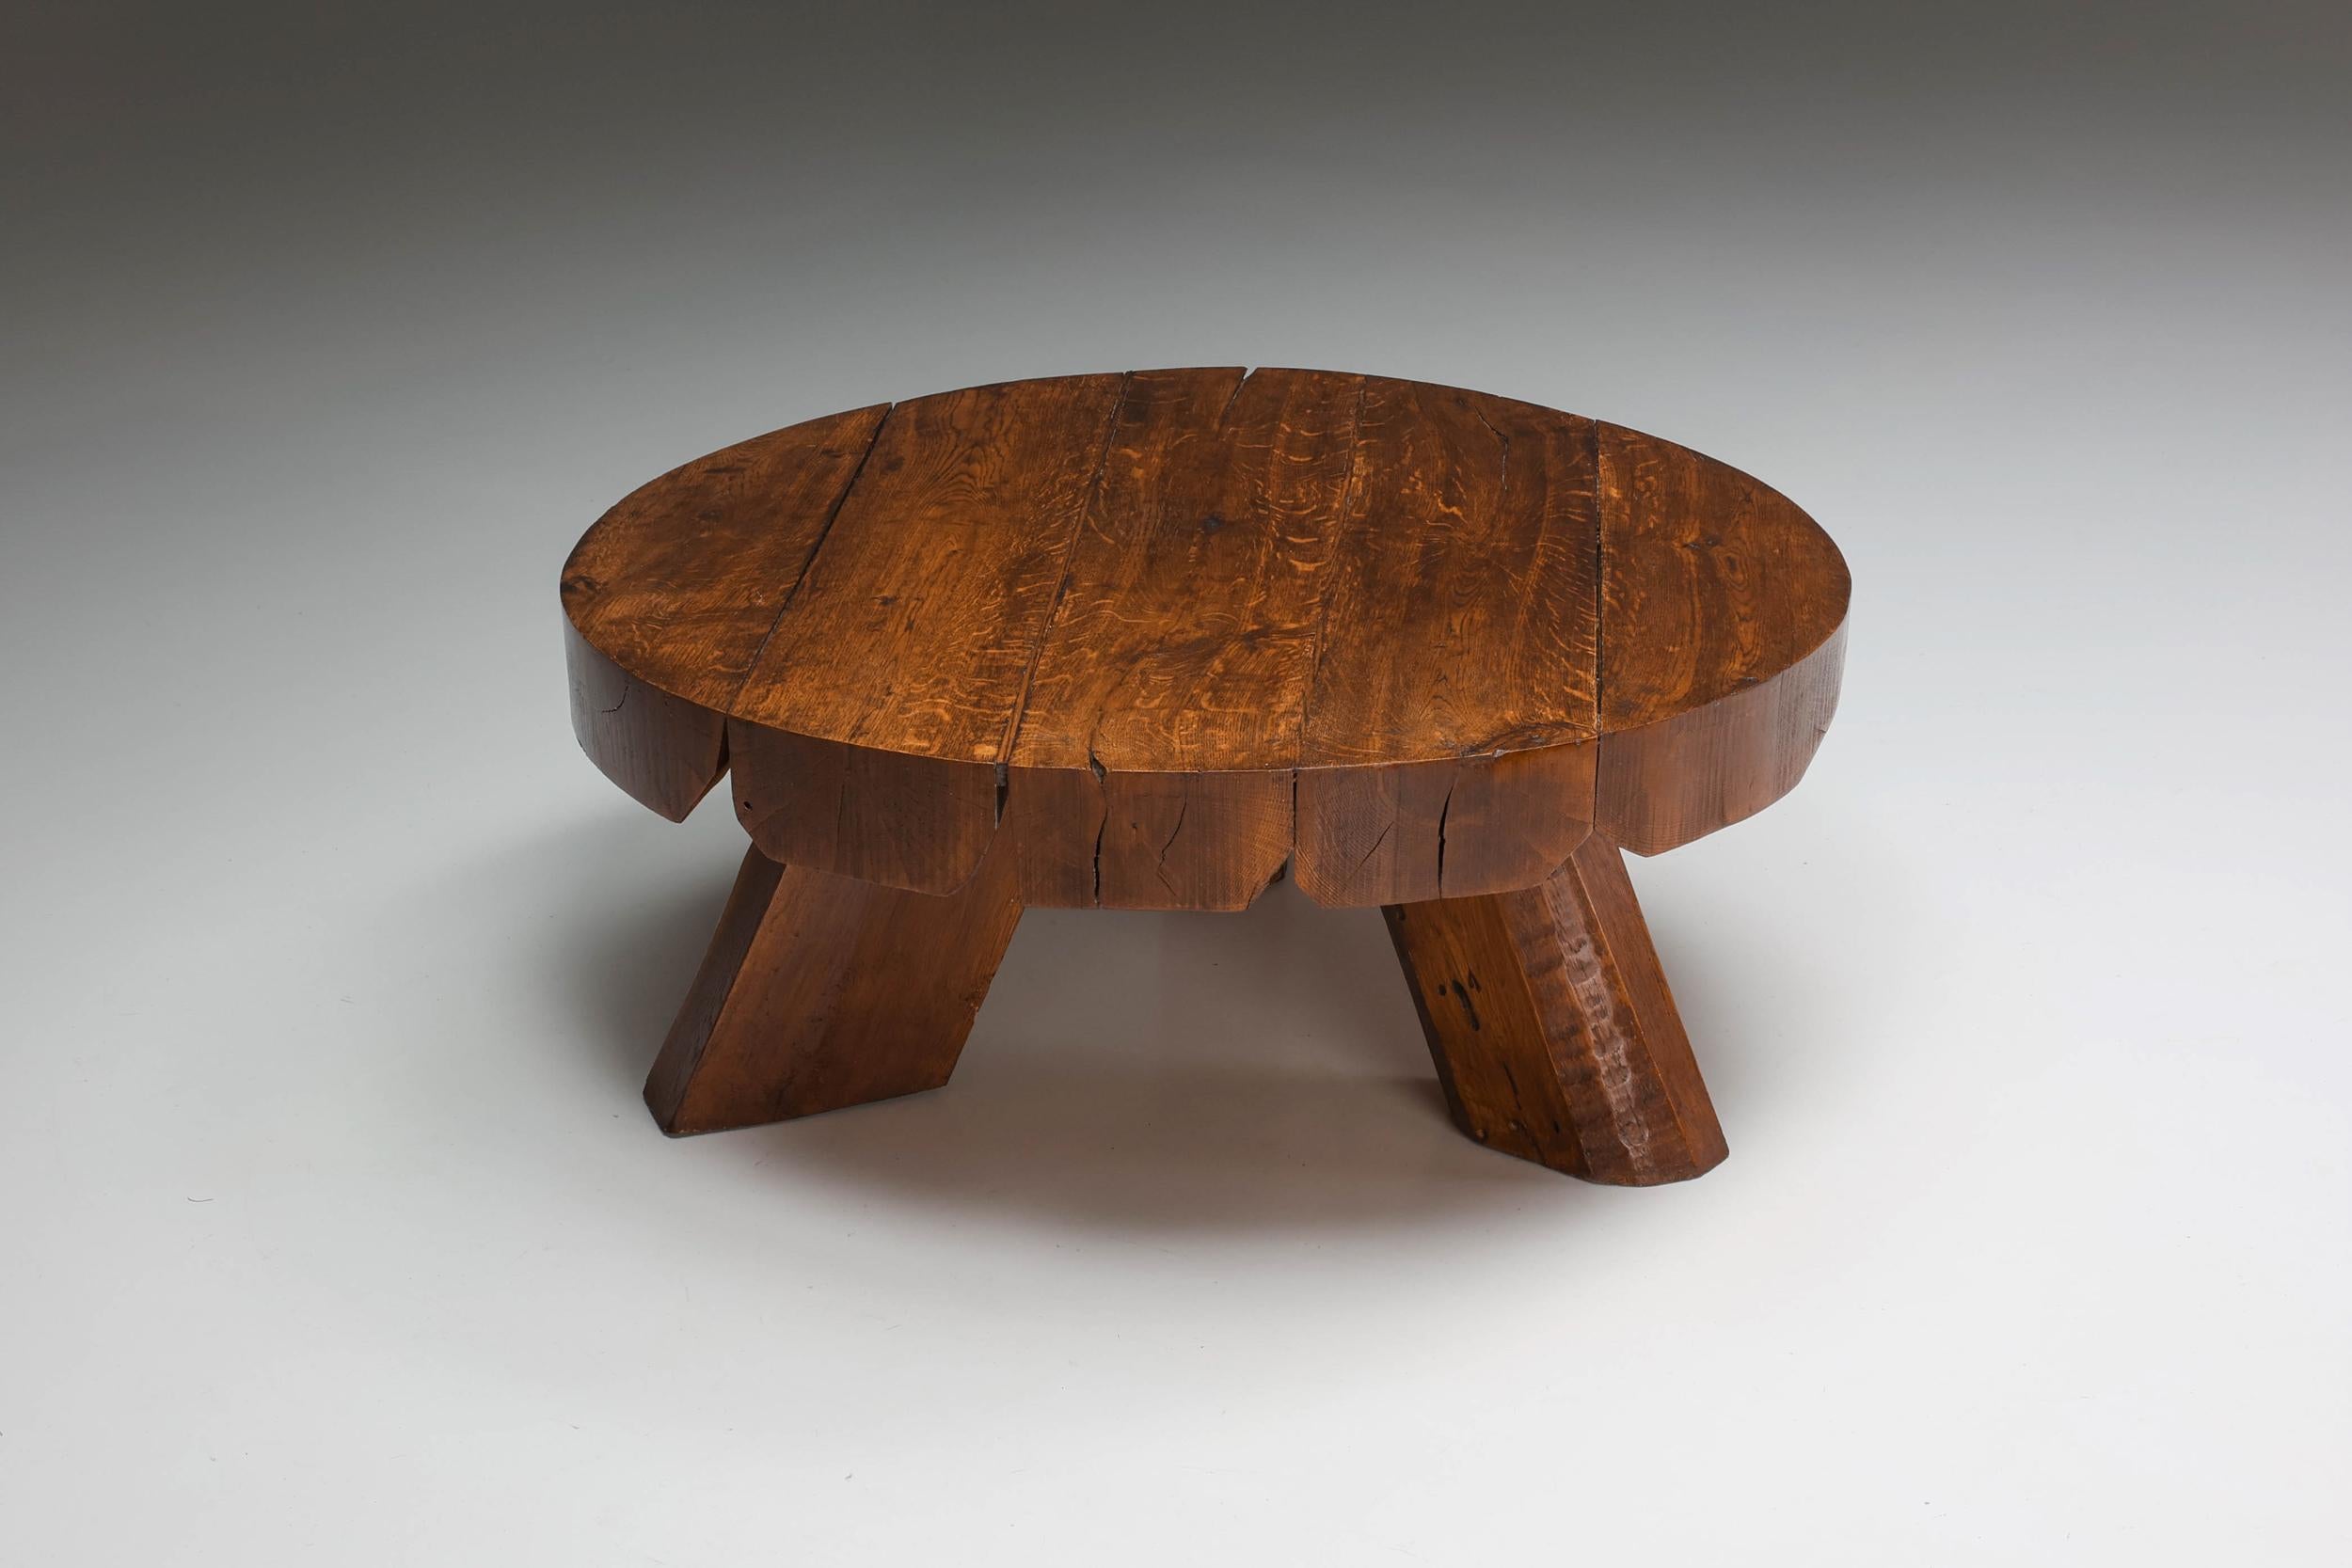 Wabi-Sabi; Rustic; side-table; coffee table; 1950's; France; Mid-Century Modern

Rustic round coffee table with remarkable patina. Would fit well in a wabi-sabi inspired interior.